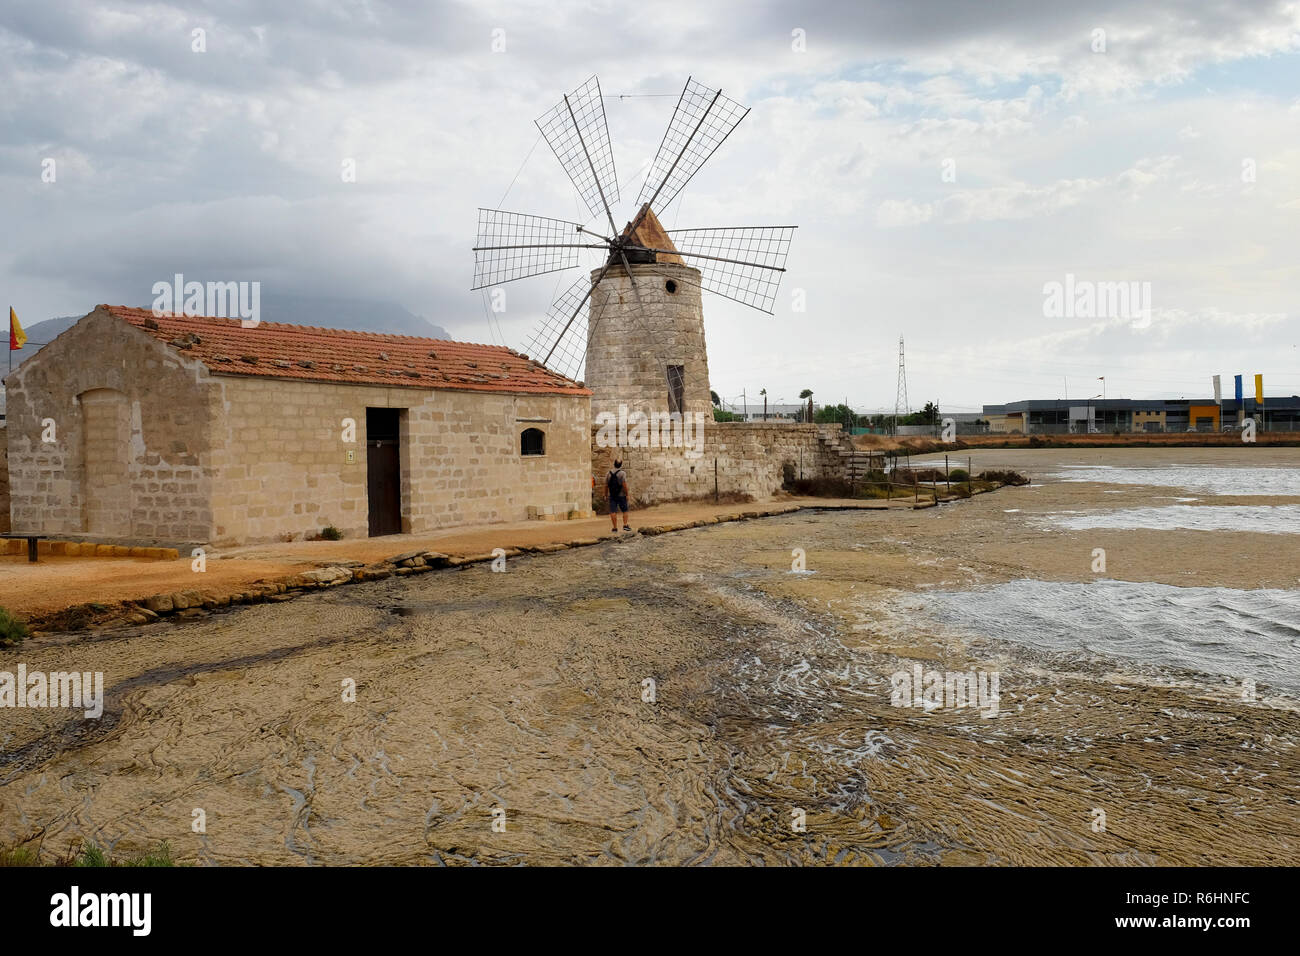 Trapani, Sicily, Italy - Old windmill and saltwork Stock Photo